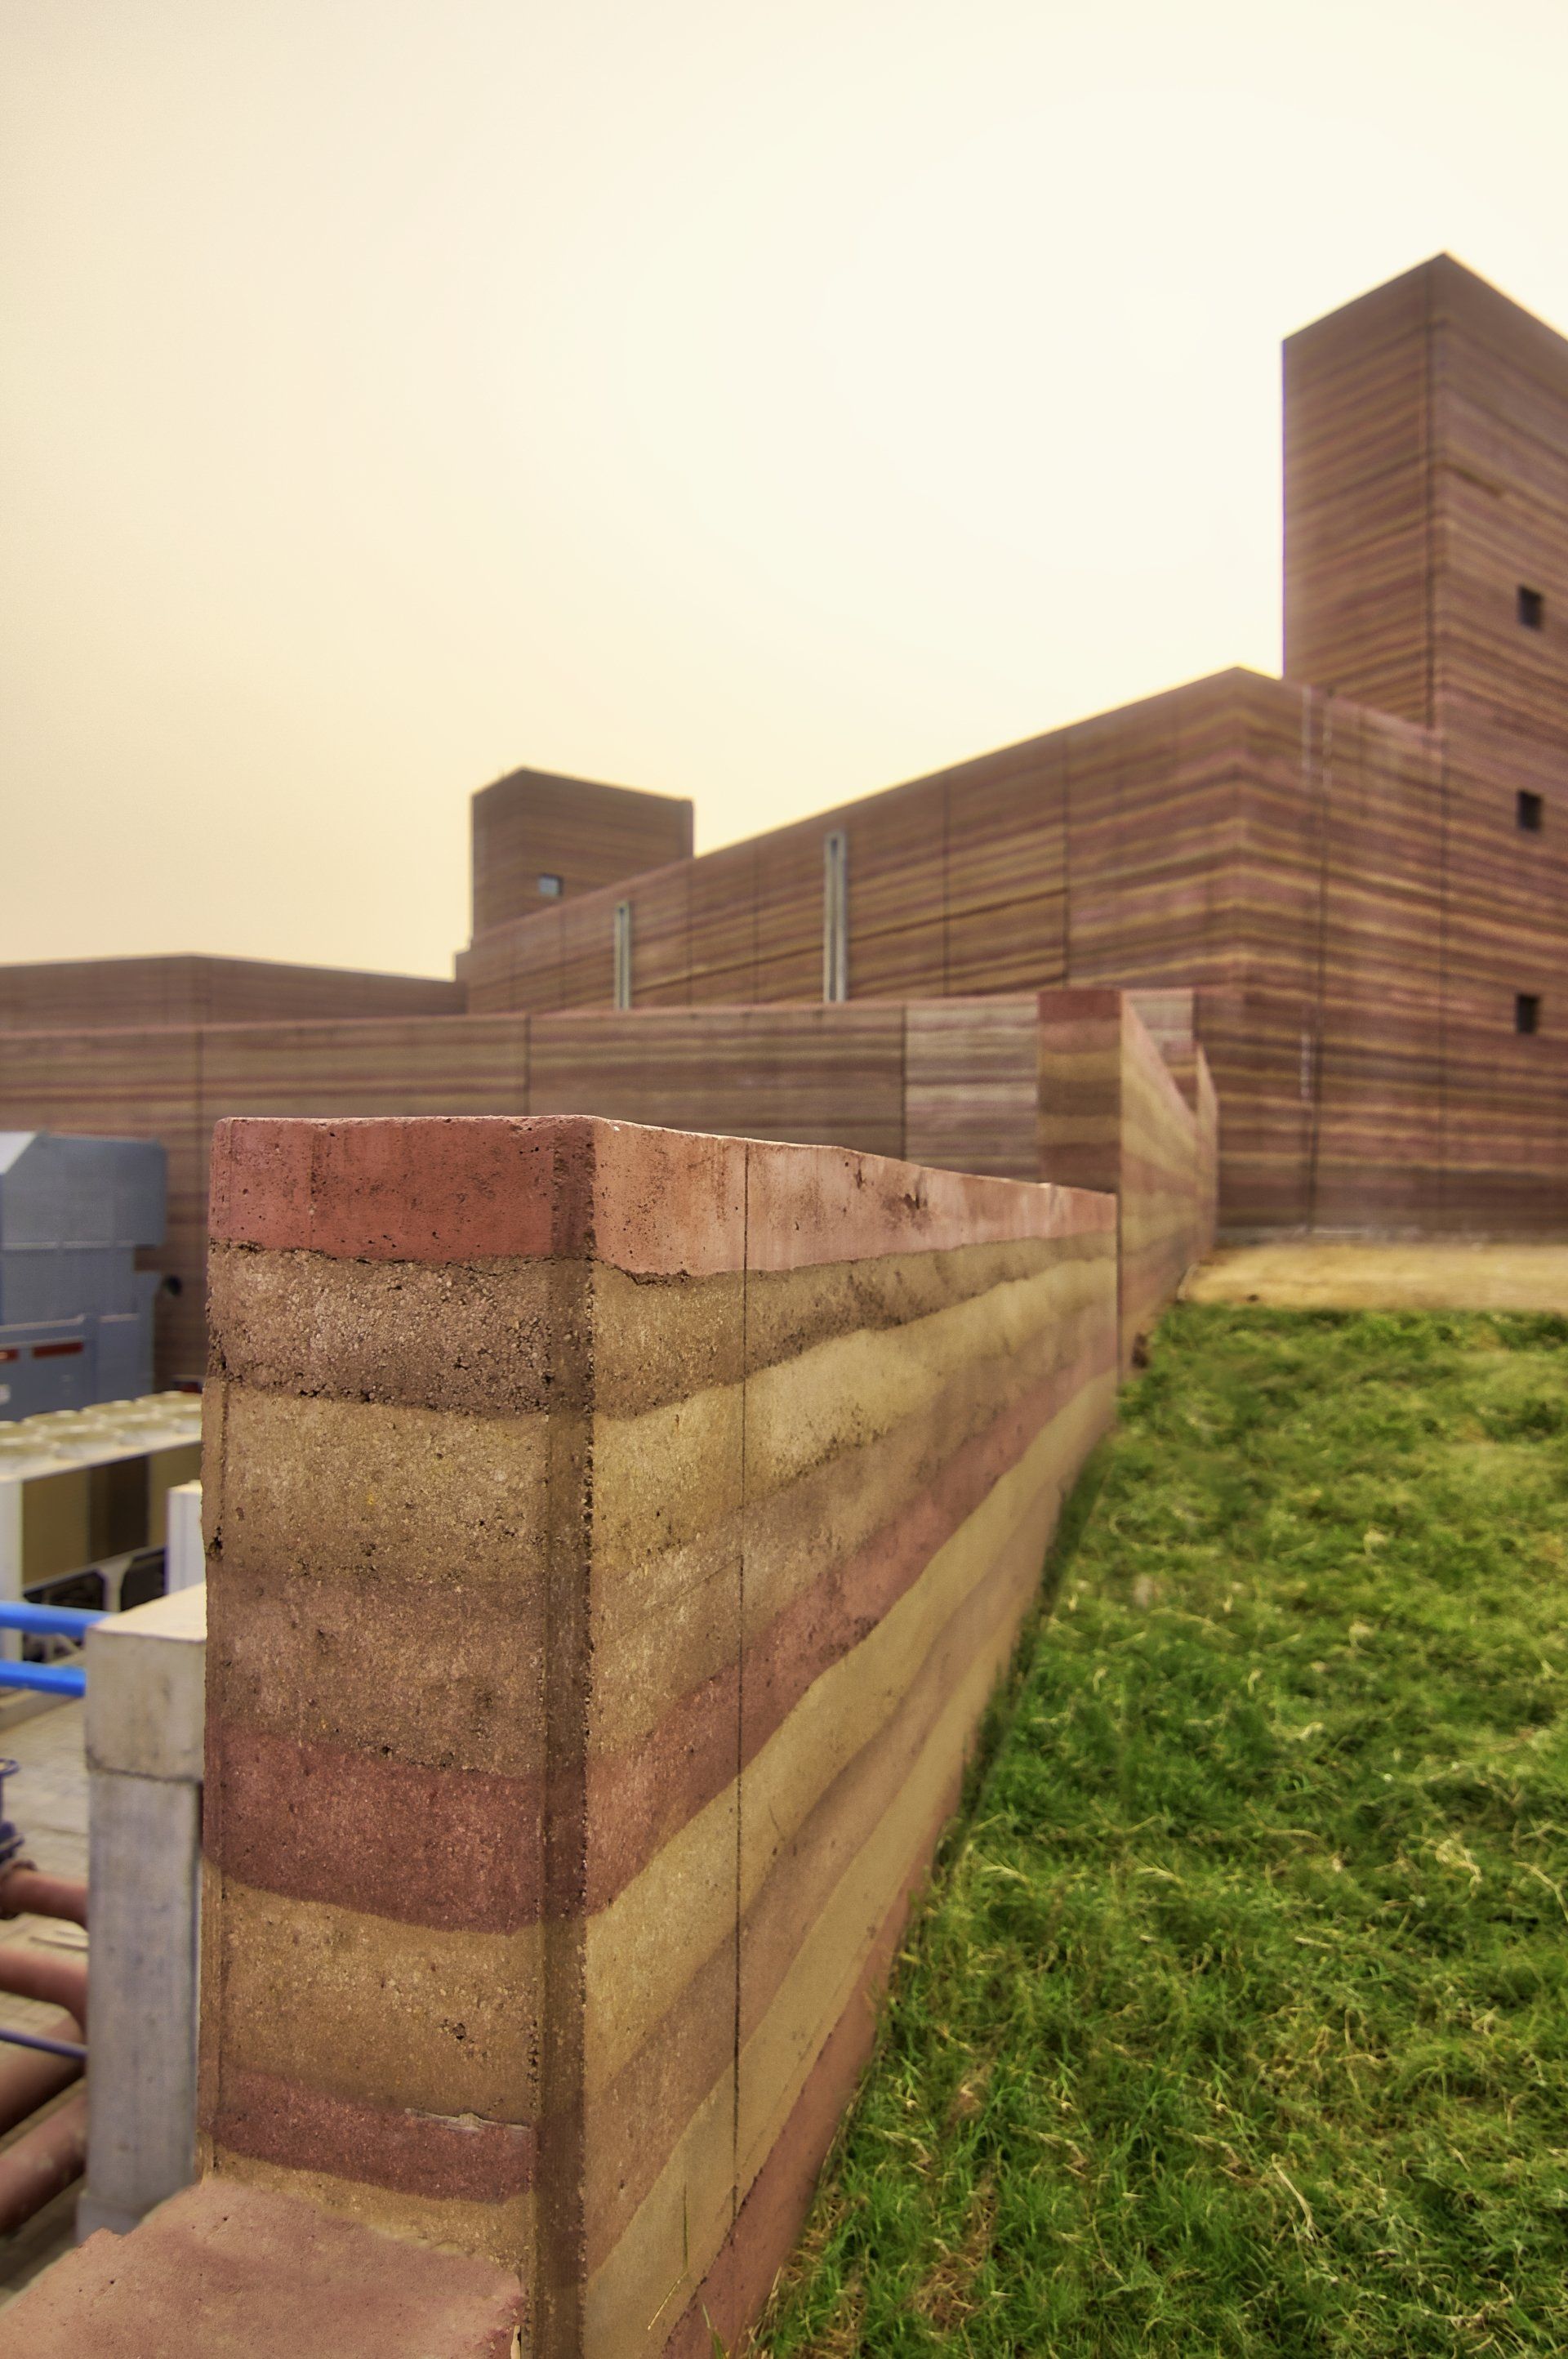 rammed earth wall from the side to show thickness in the foreground, Telenor Head Office in the background